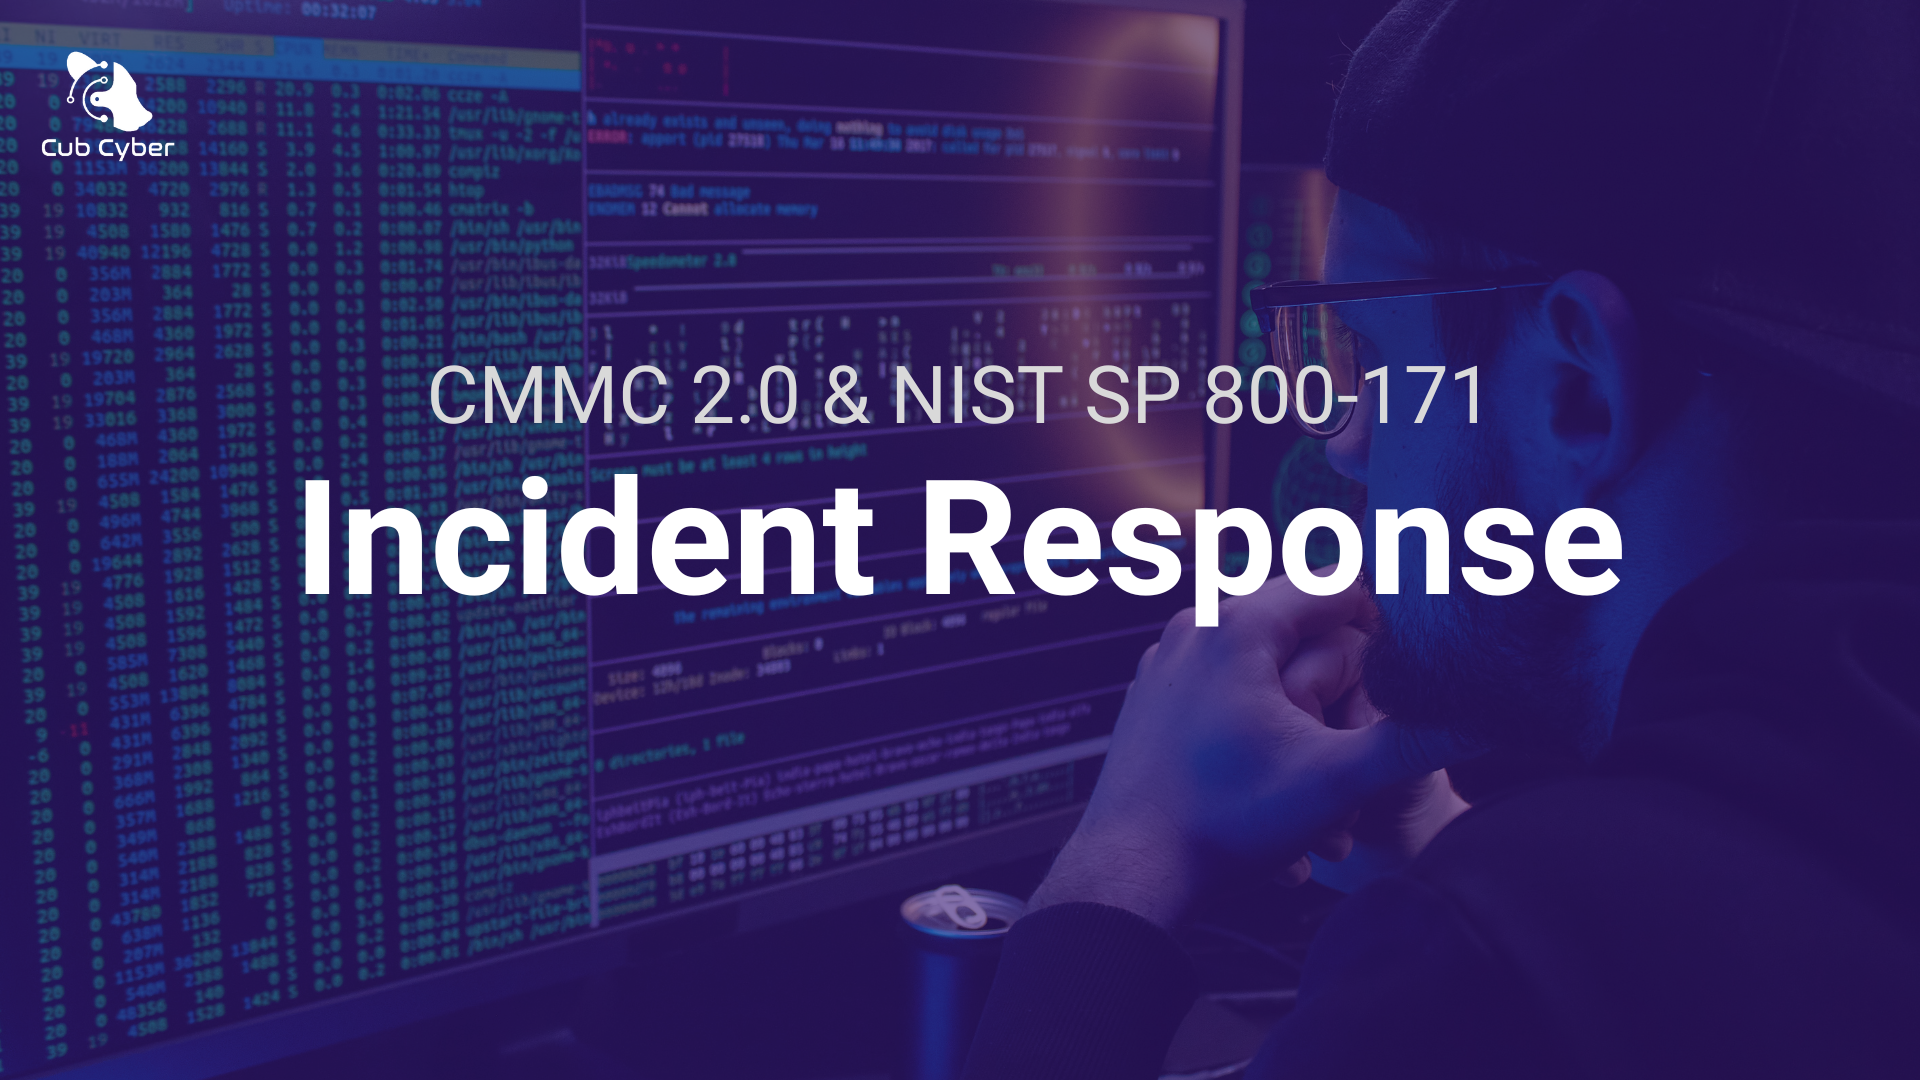 Incident Response Compliance for NIST 800-171 and CMMC